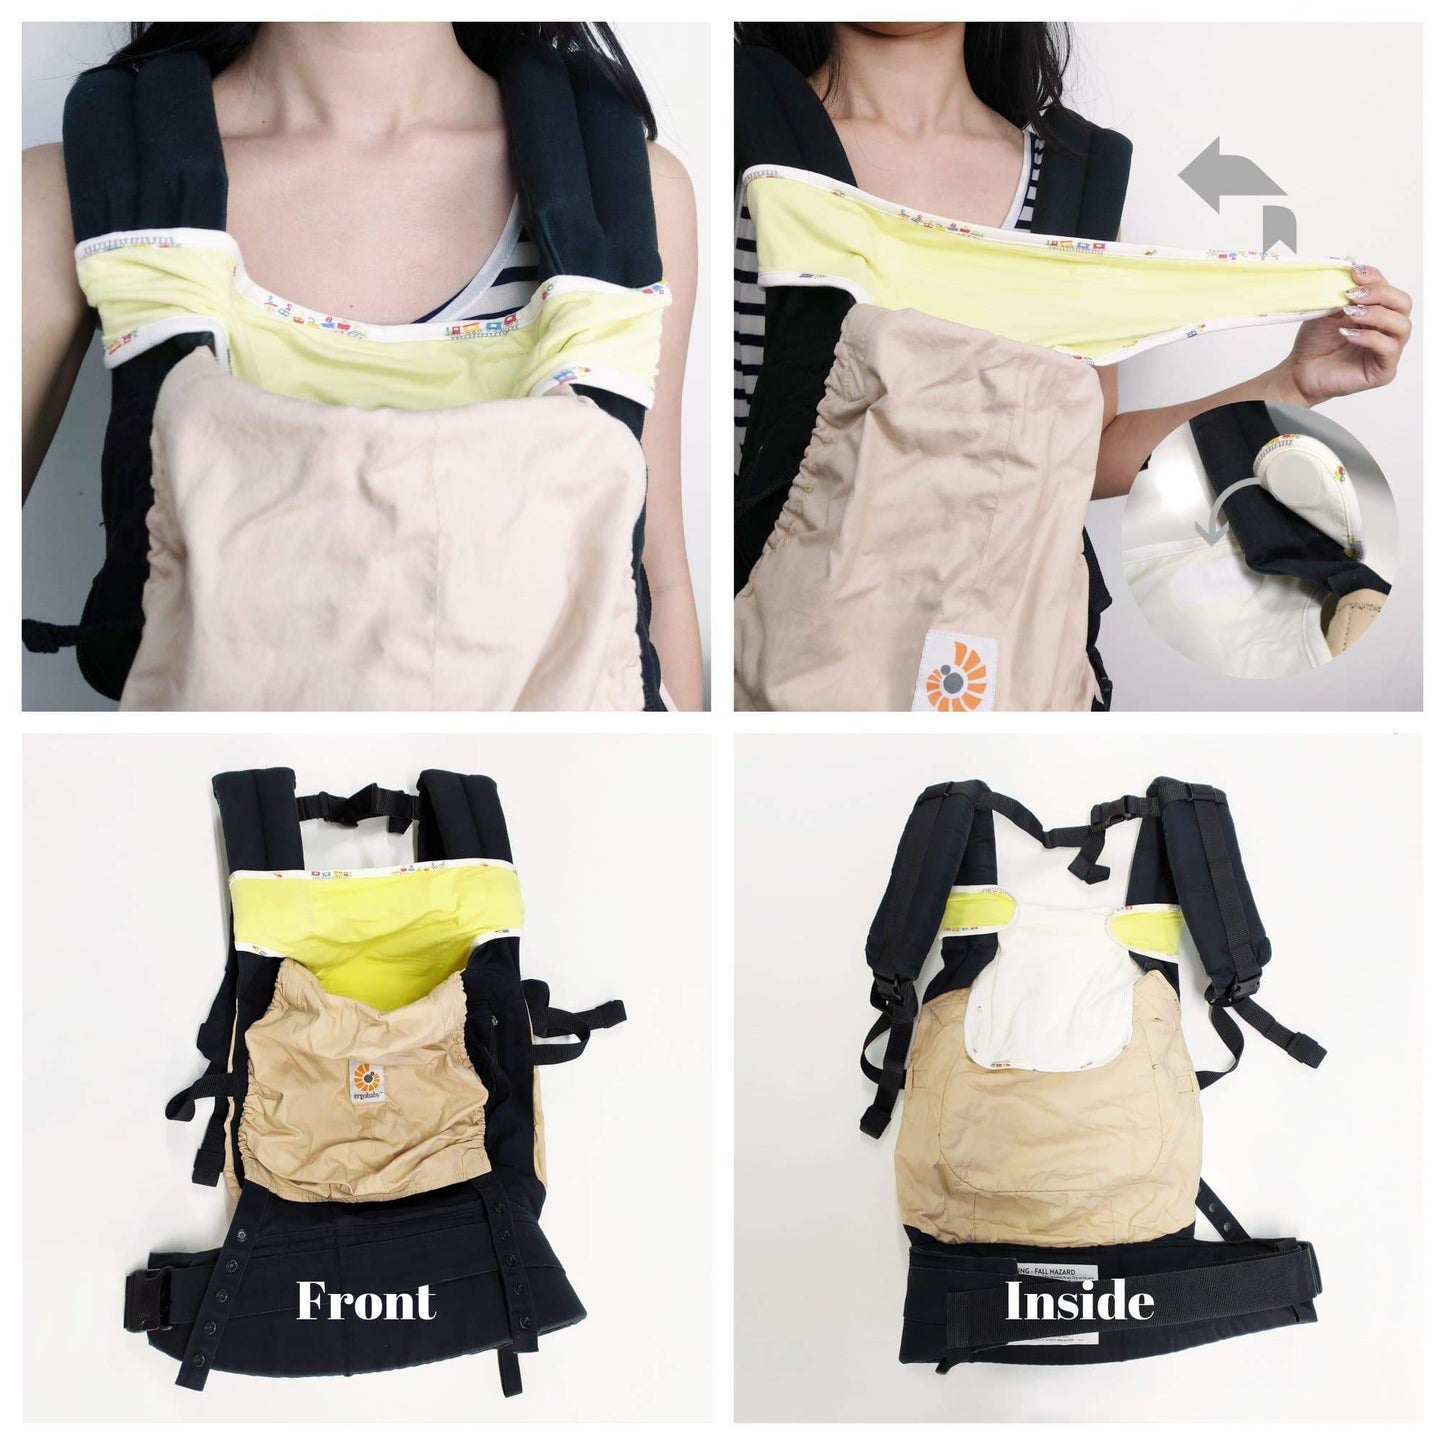 Baby Carrier Cloth (Pack of 2) - Simply Life